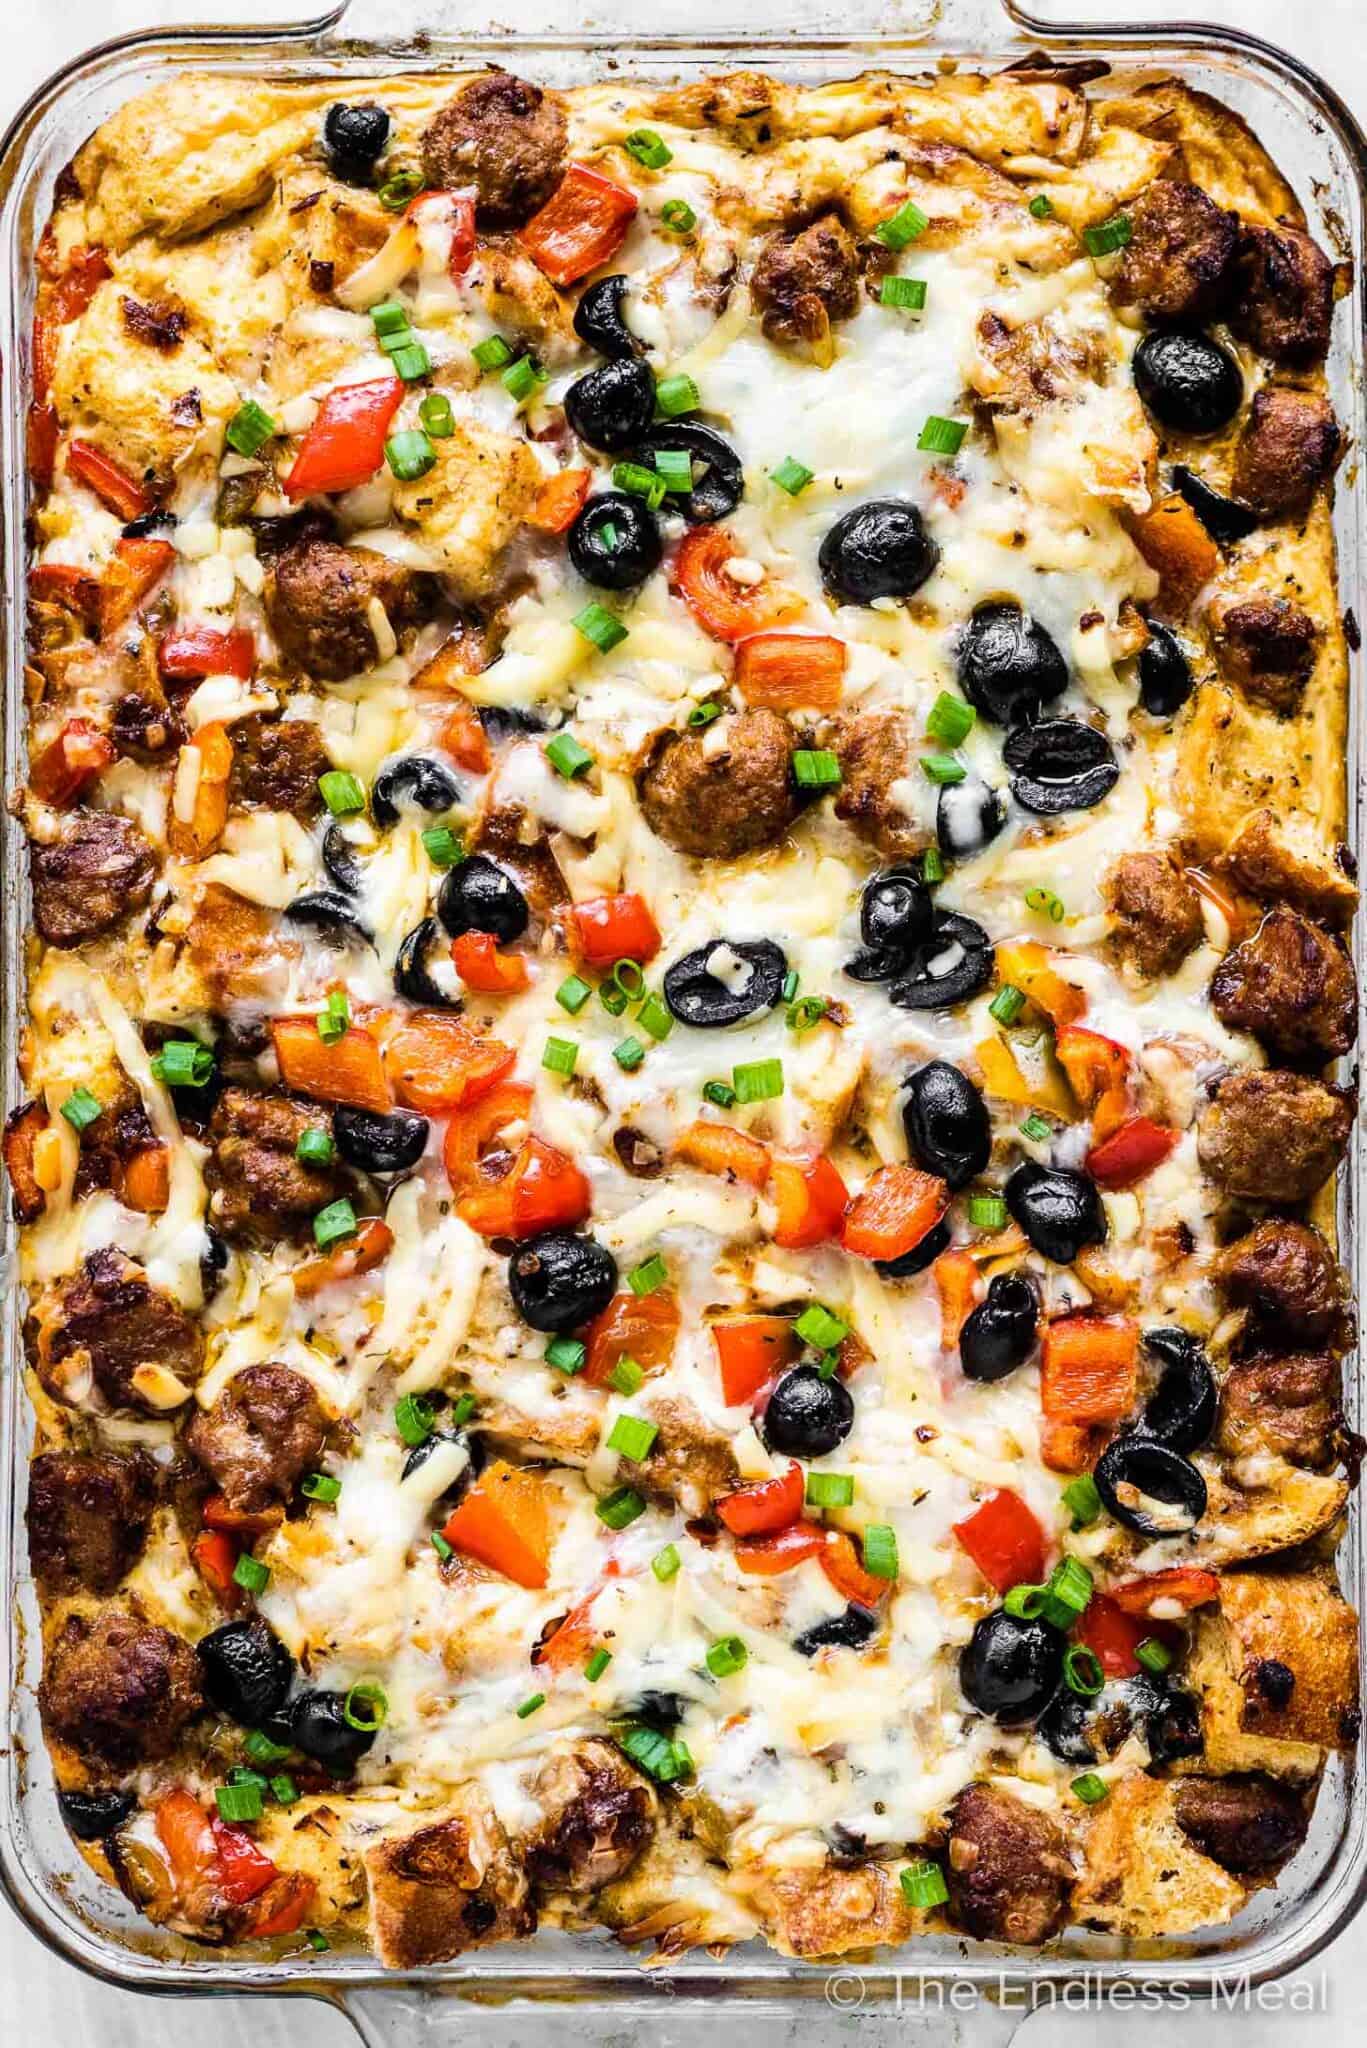 A Spanish breakfast casserole with olives hot out of the oven.